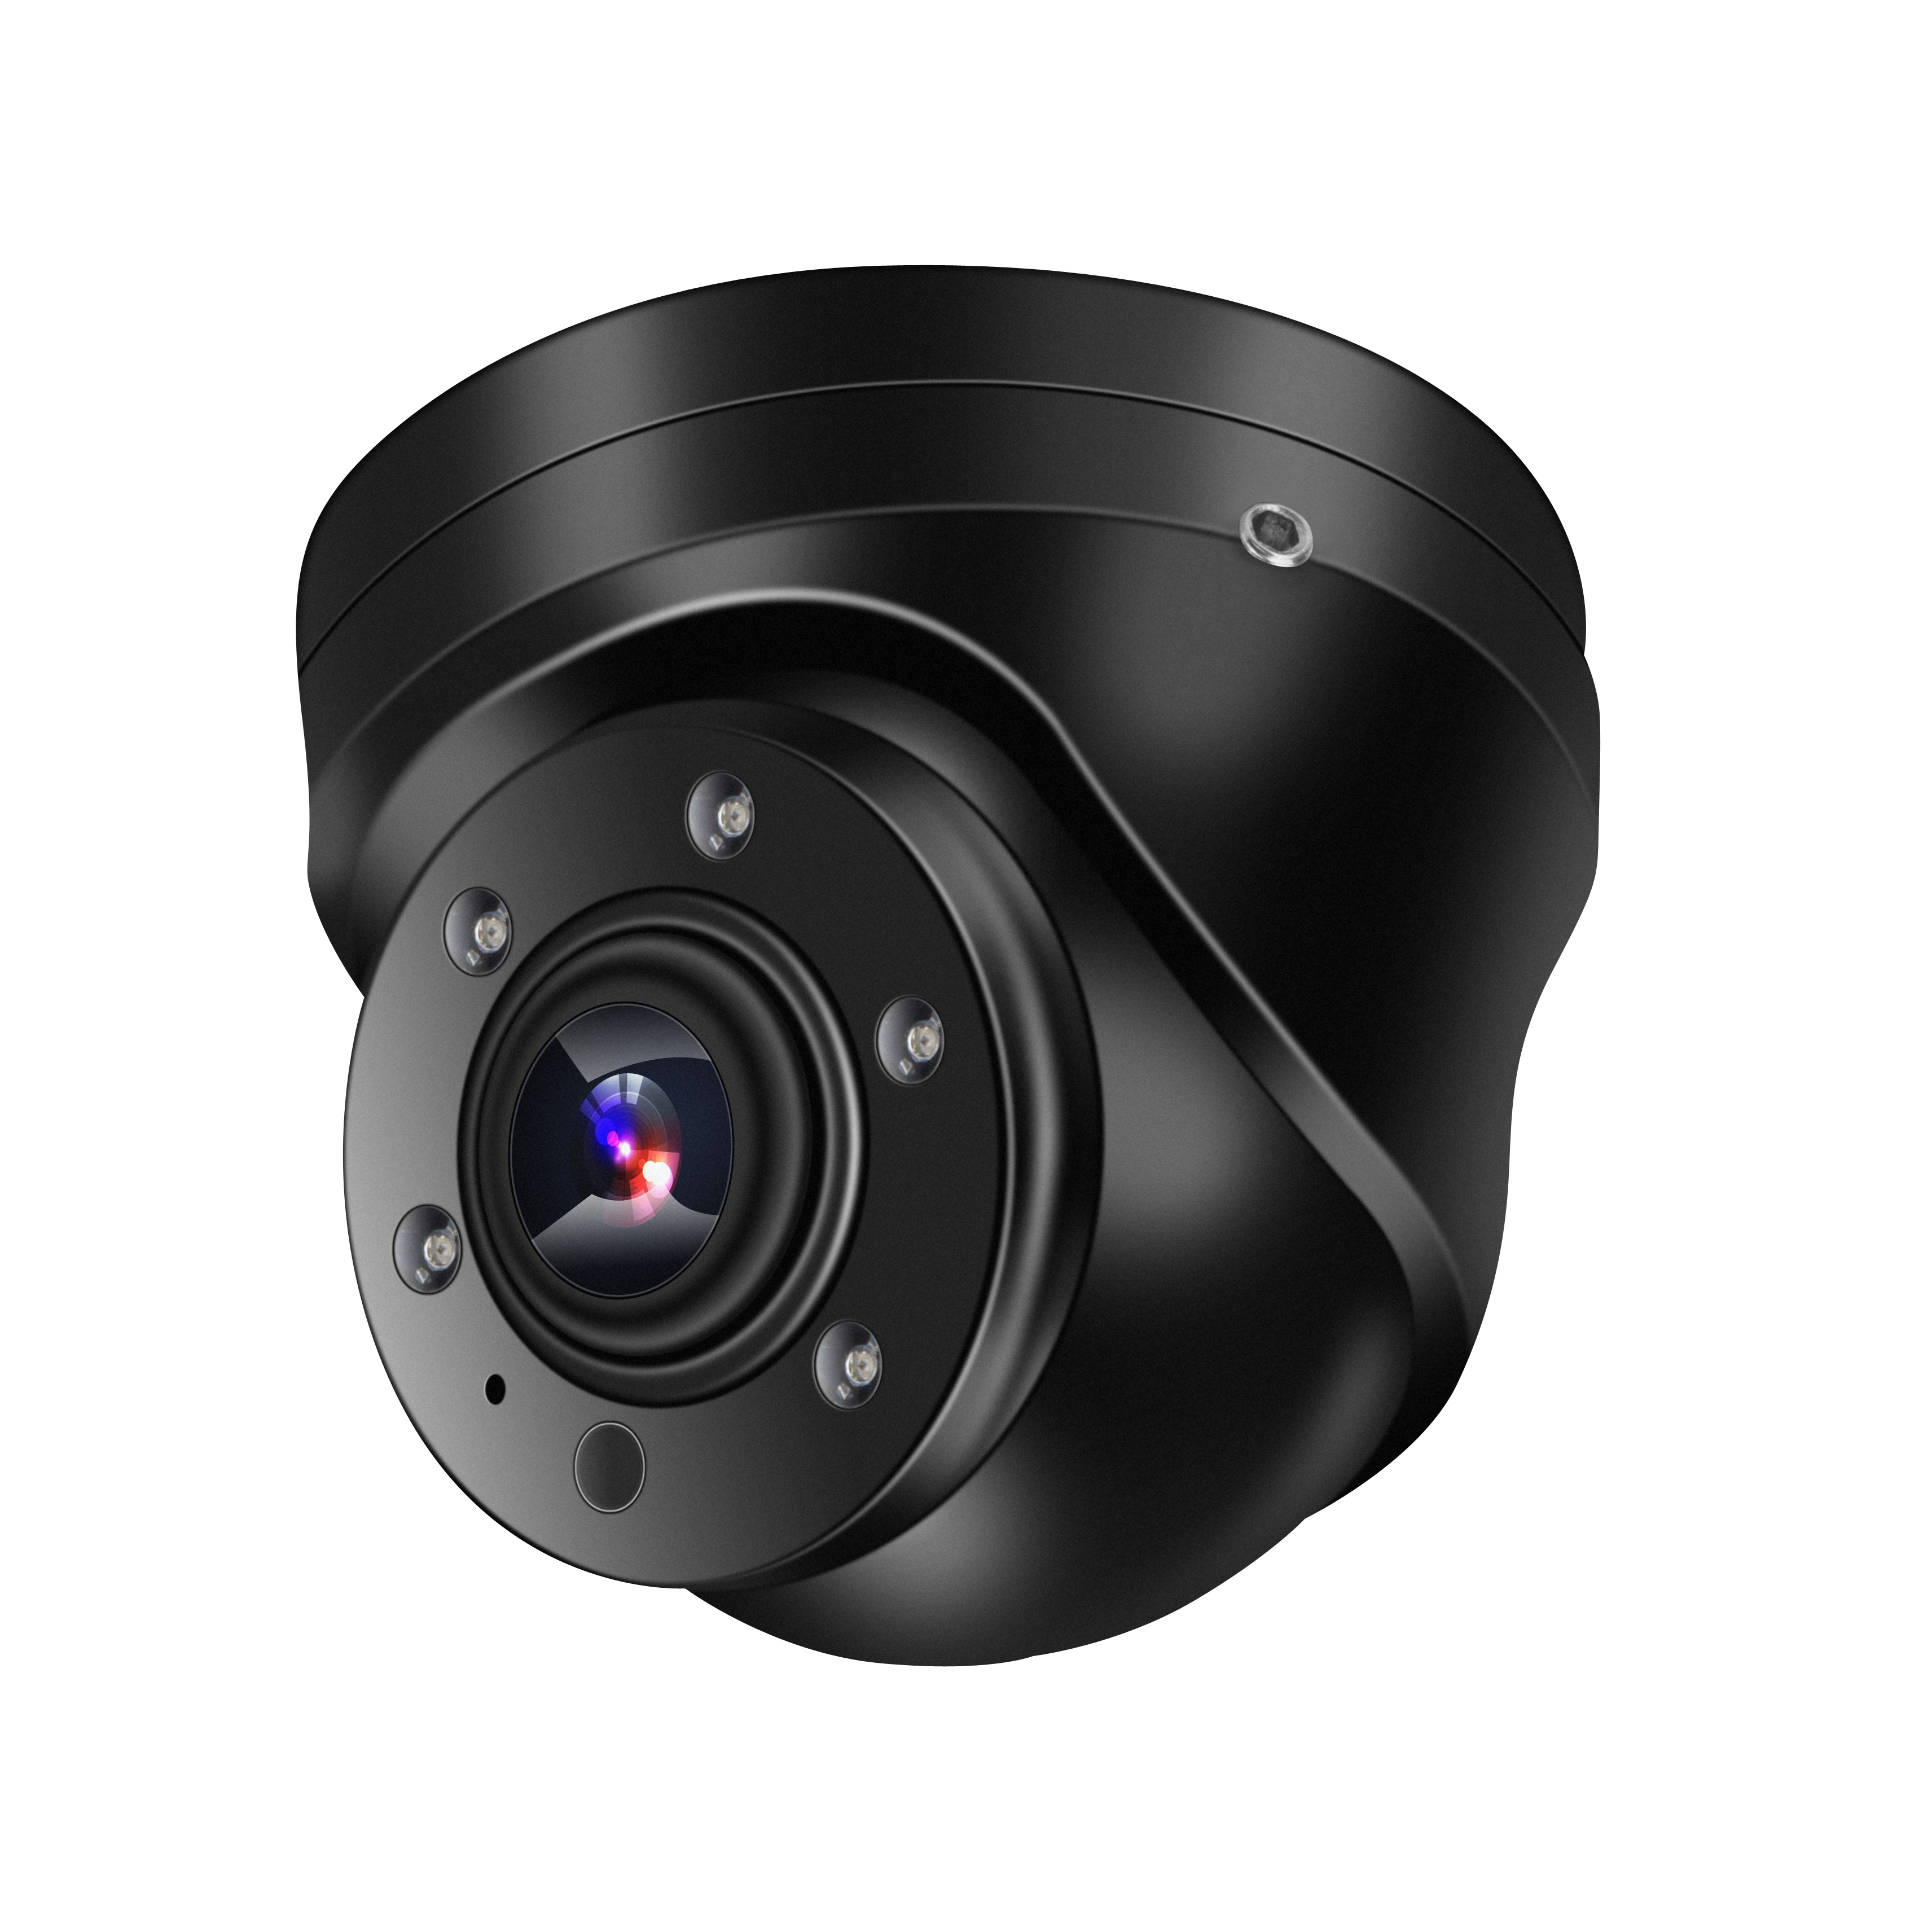 What is Dome Camera